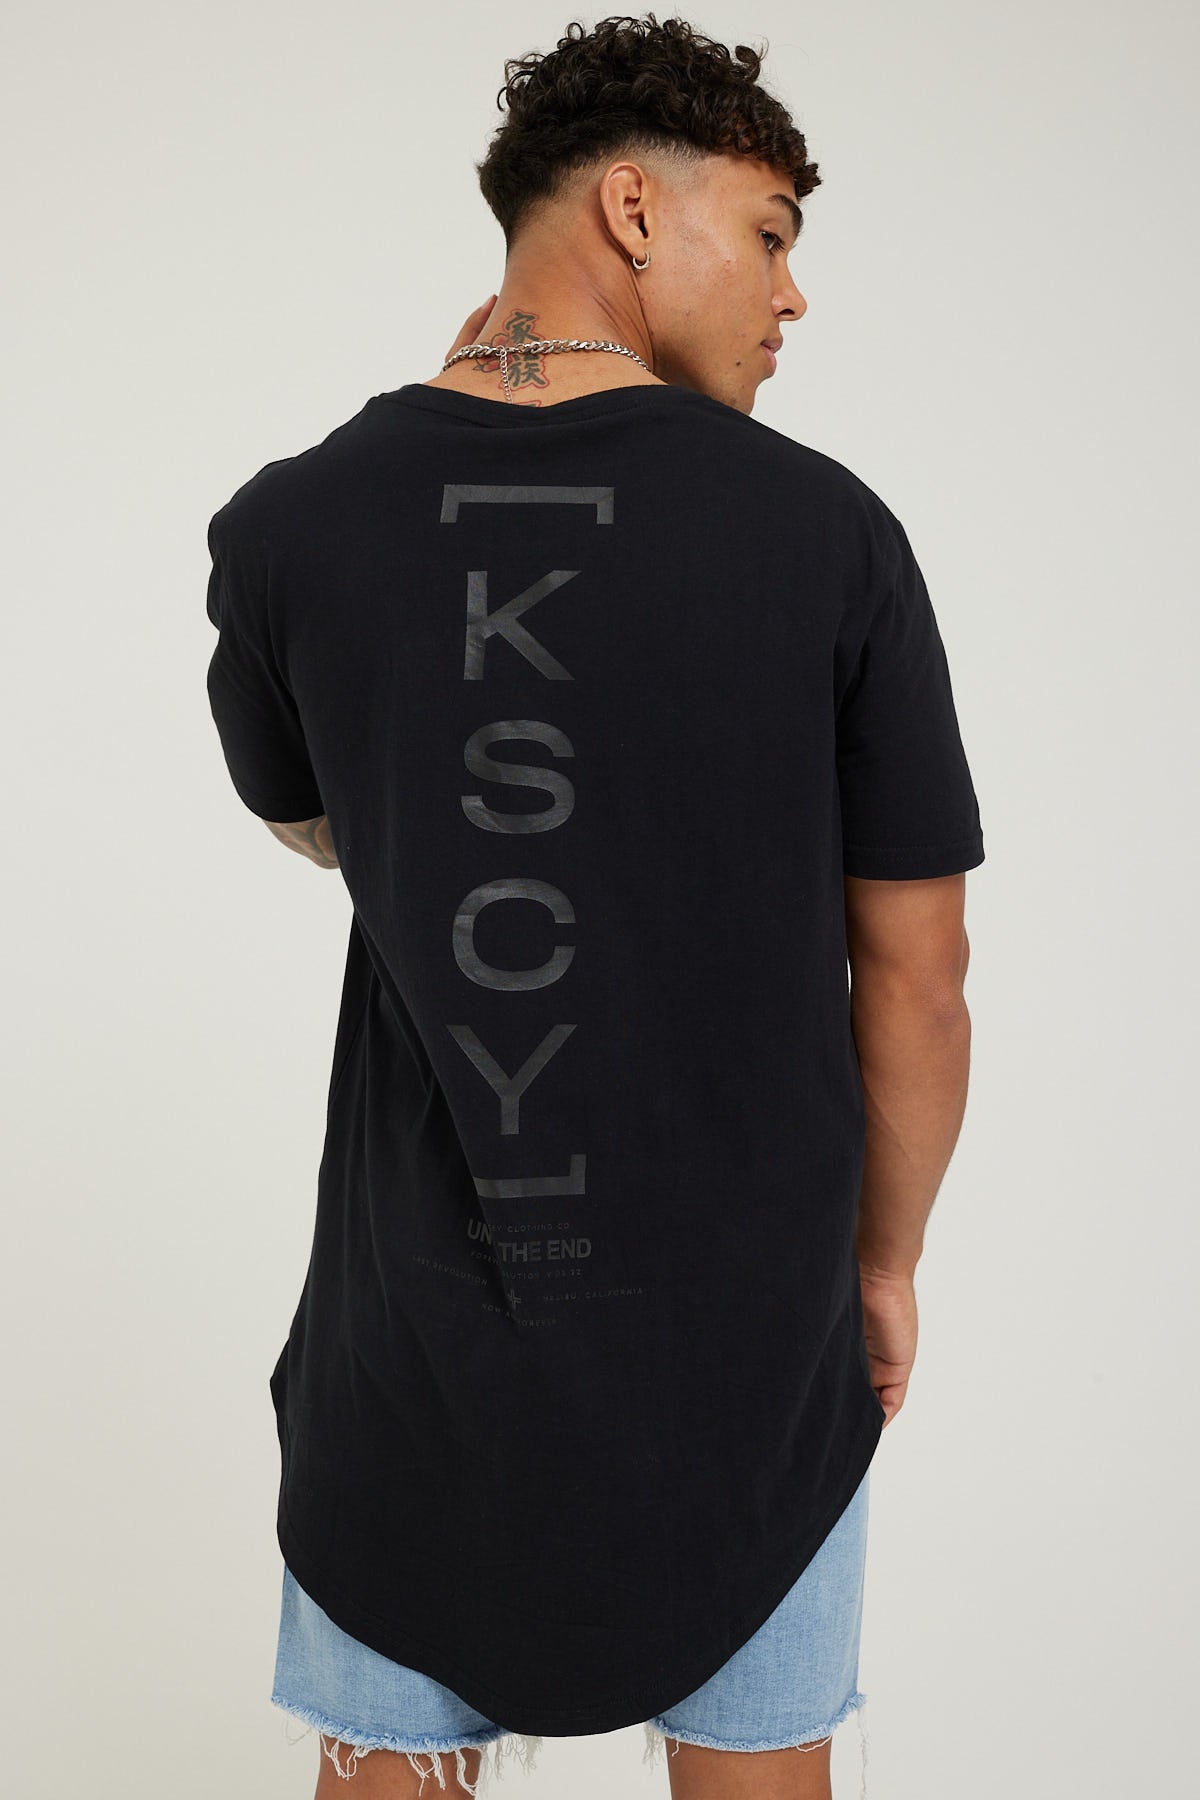 Kiss Chacey Until The End Dual Curved Tee Jet Black